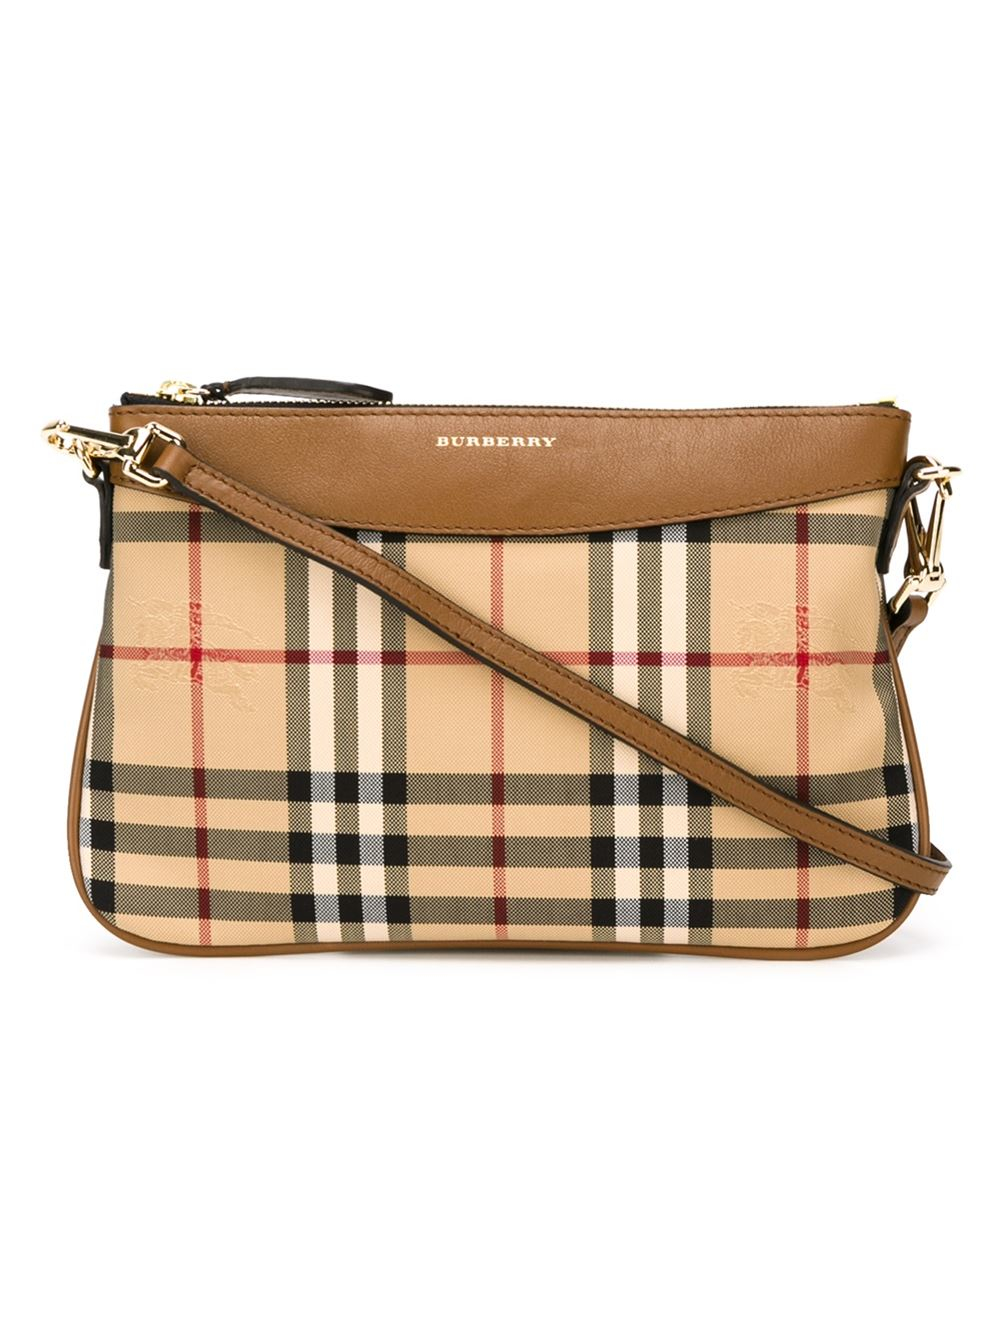 Burberry Horseferry Check Crossbody Bag in Brown | Lyst